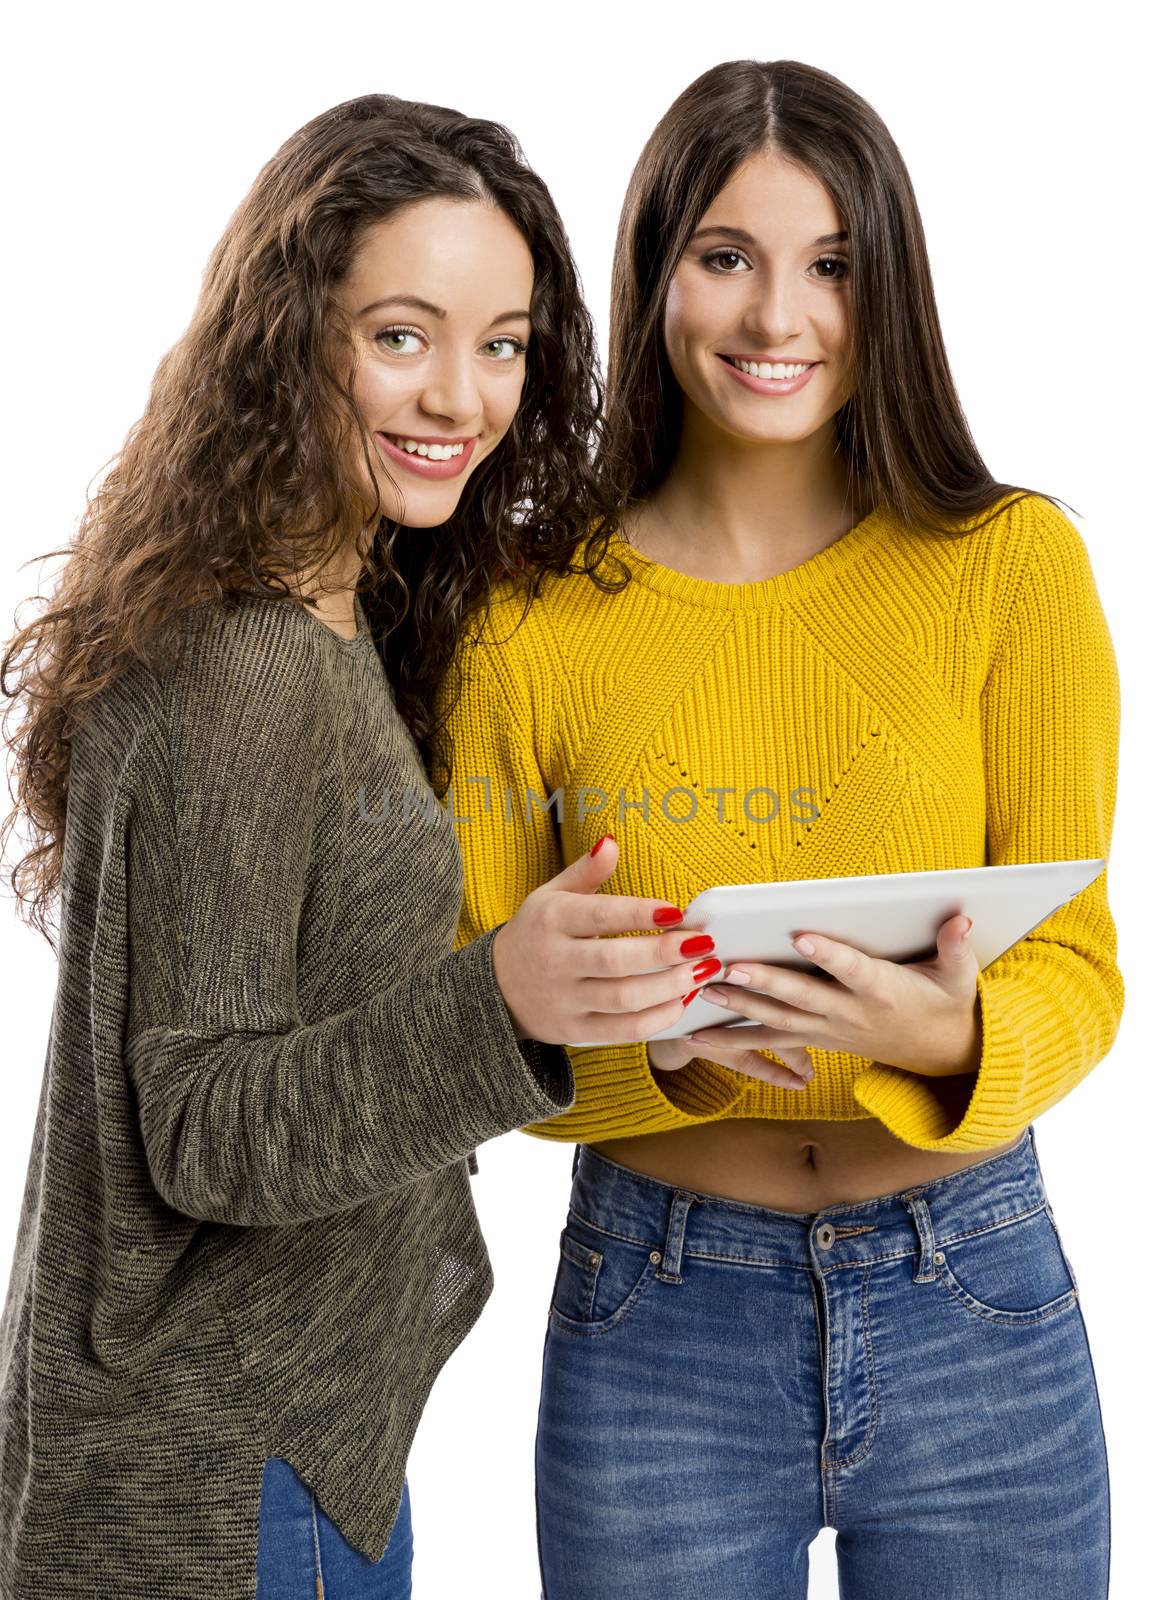 Studio portrait of two beautiful girls holding and showing something on a tablet